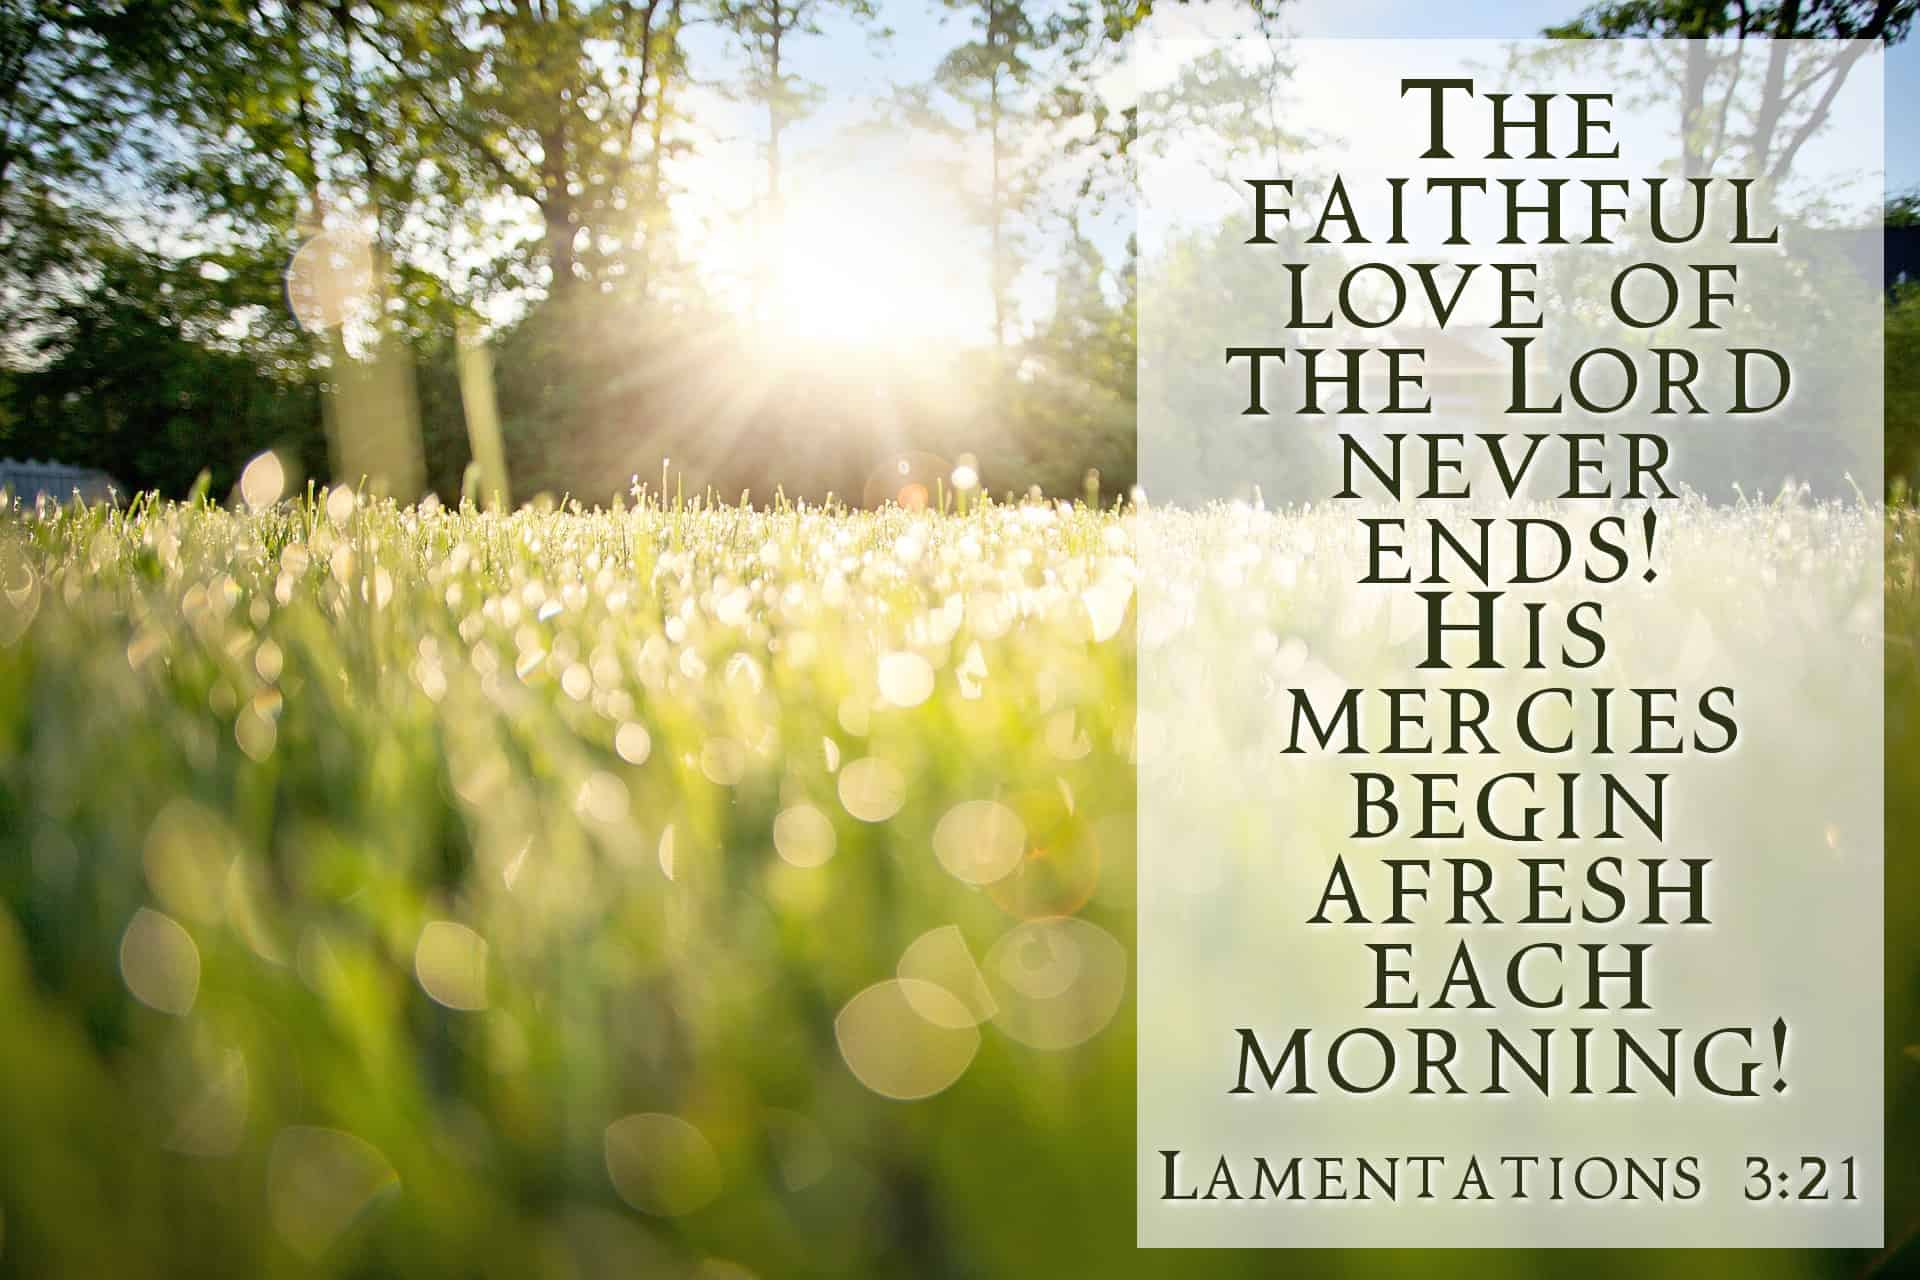 The faithful love of the Lord never ends! His mercies begin afresh each morning! Lamentations 3:21